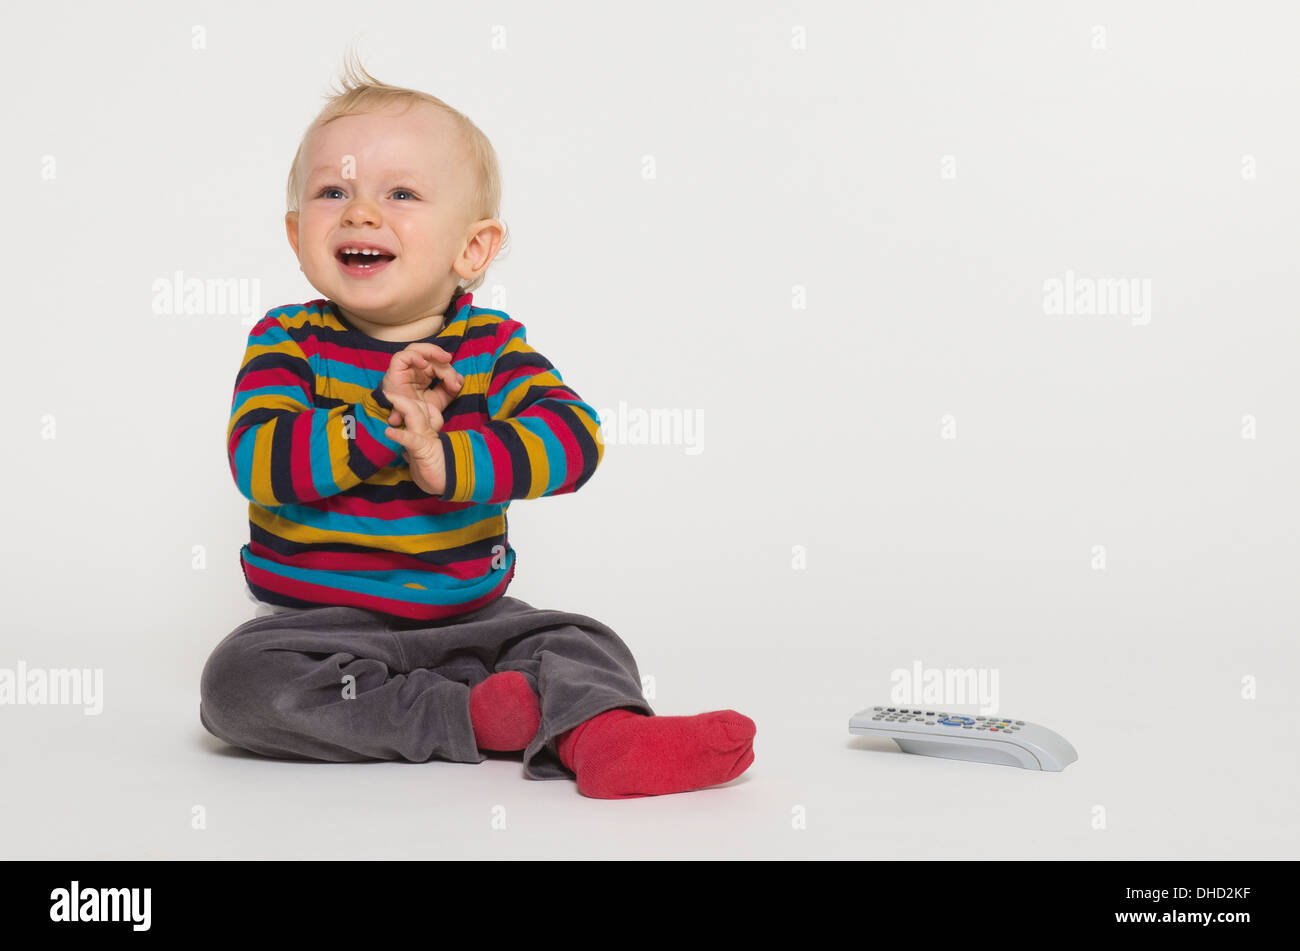 Baby boy playing with remote control, studio shot Stock Photo